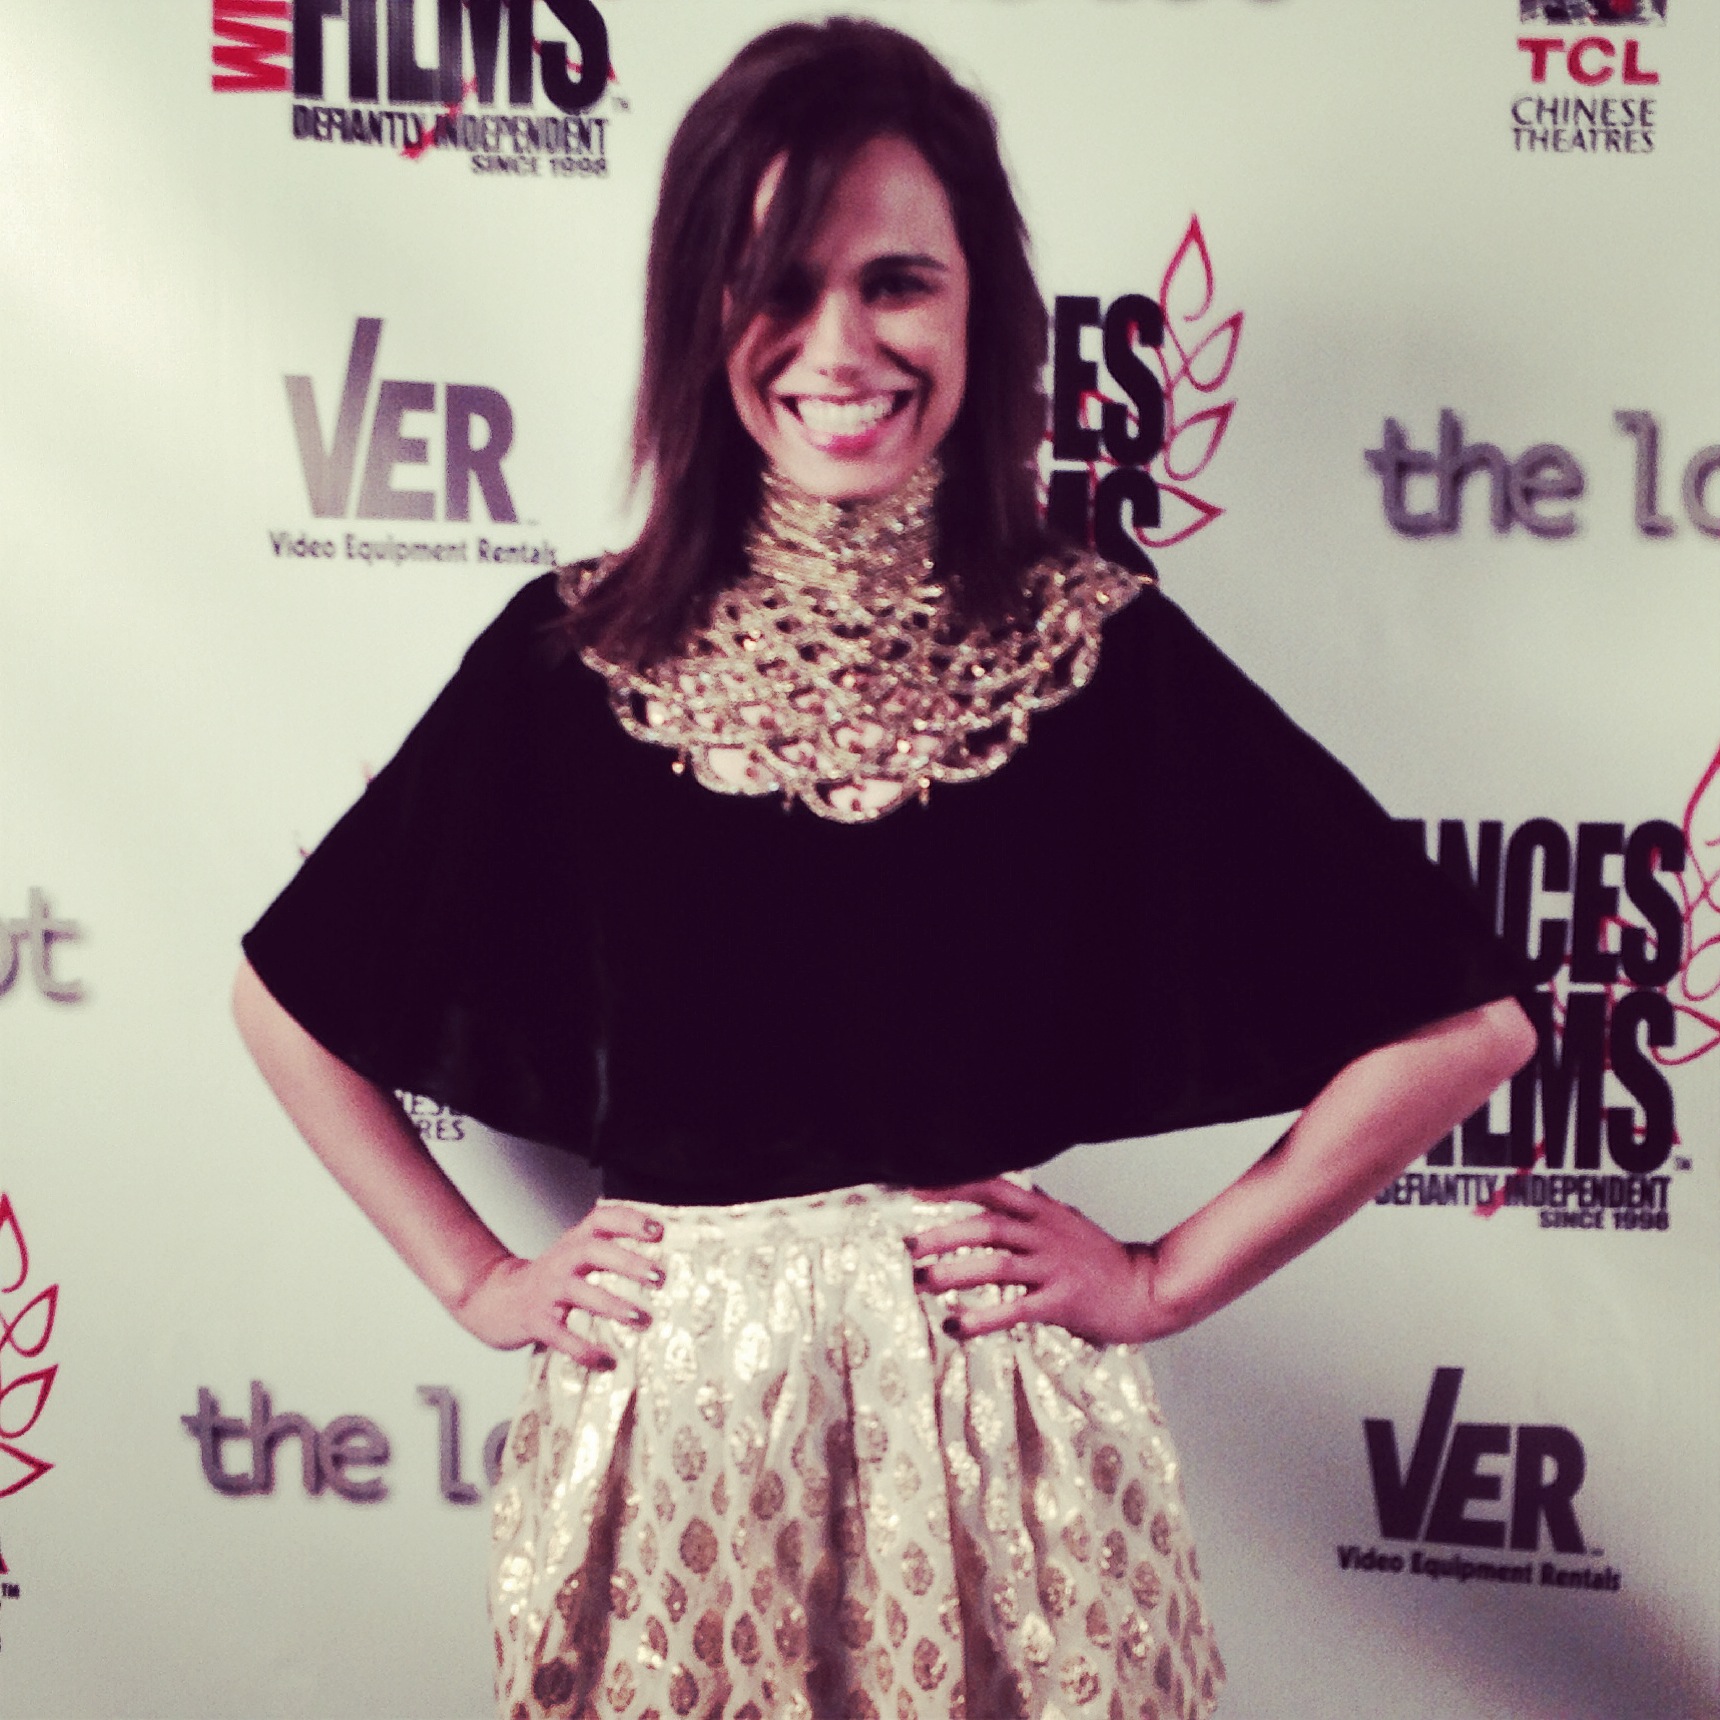 Melissa Mars @ Dances with films 2014 - with 